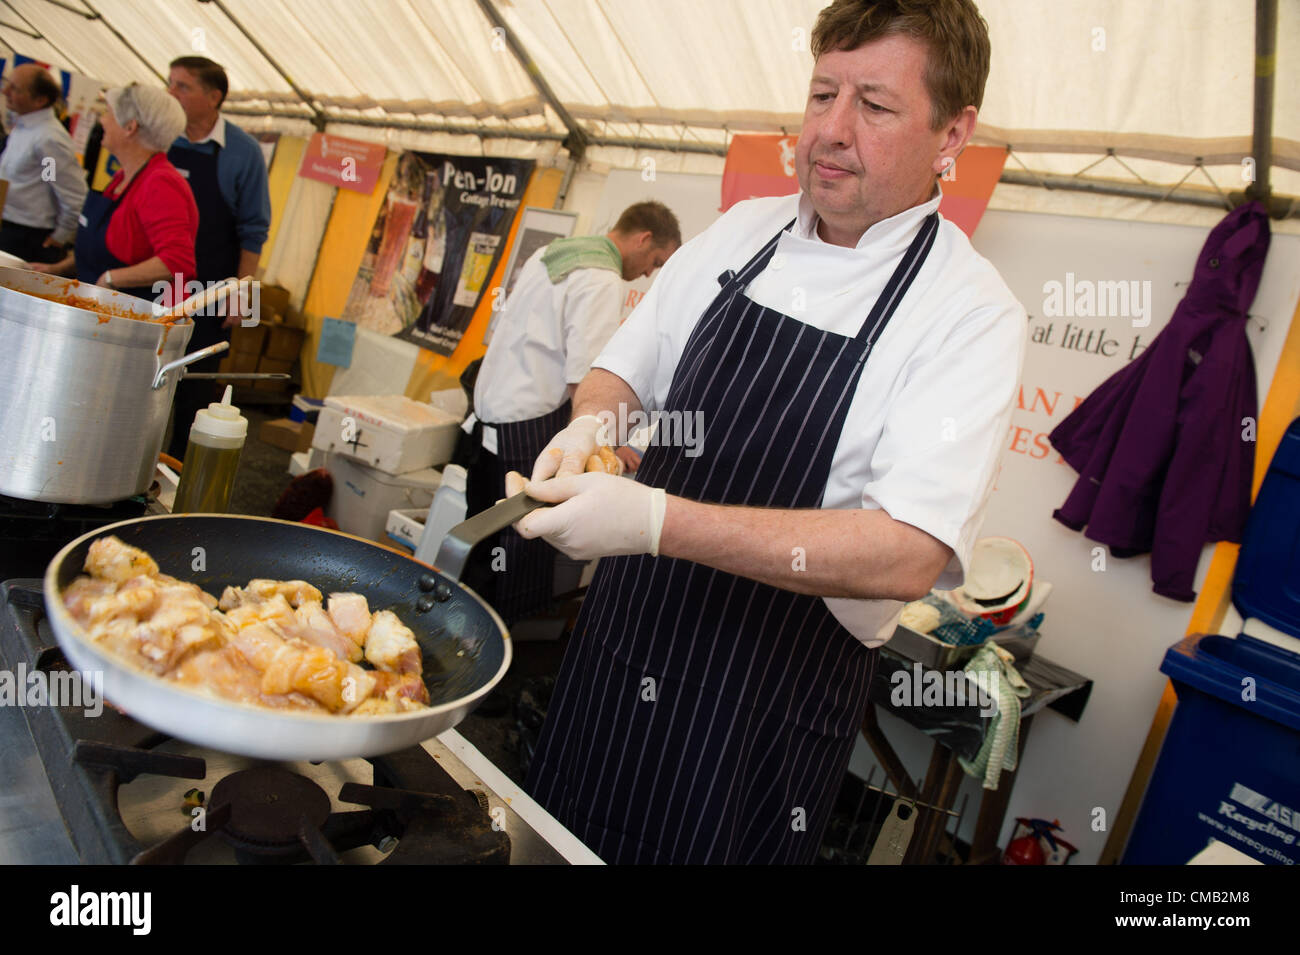 Aberaeron, Ceredigion, Wales. 8th July 2012. Roger Jones, michelin starred chef at The Harrow at Little Bedwyn, during the Cardigan Bay Seafood Festival. Stock Photo